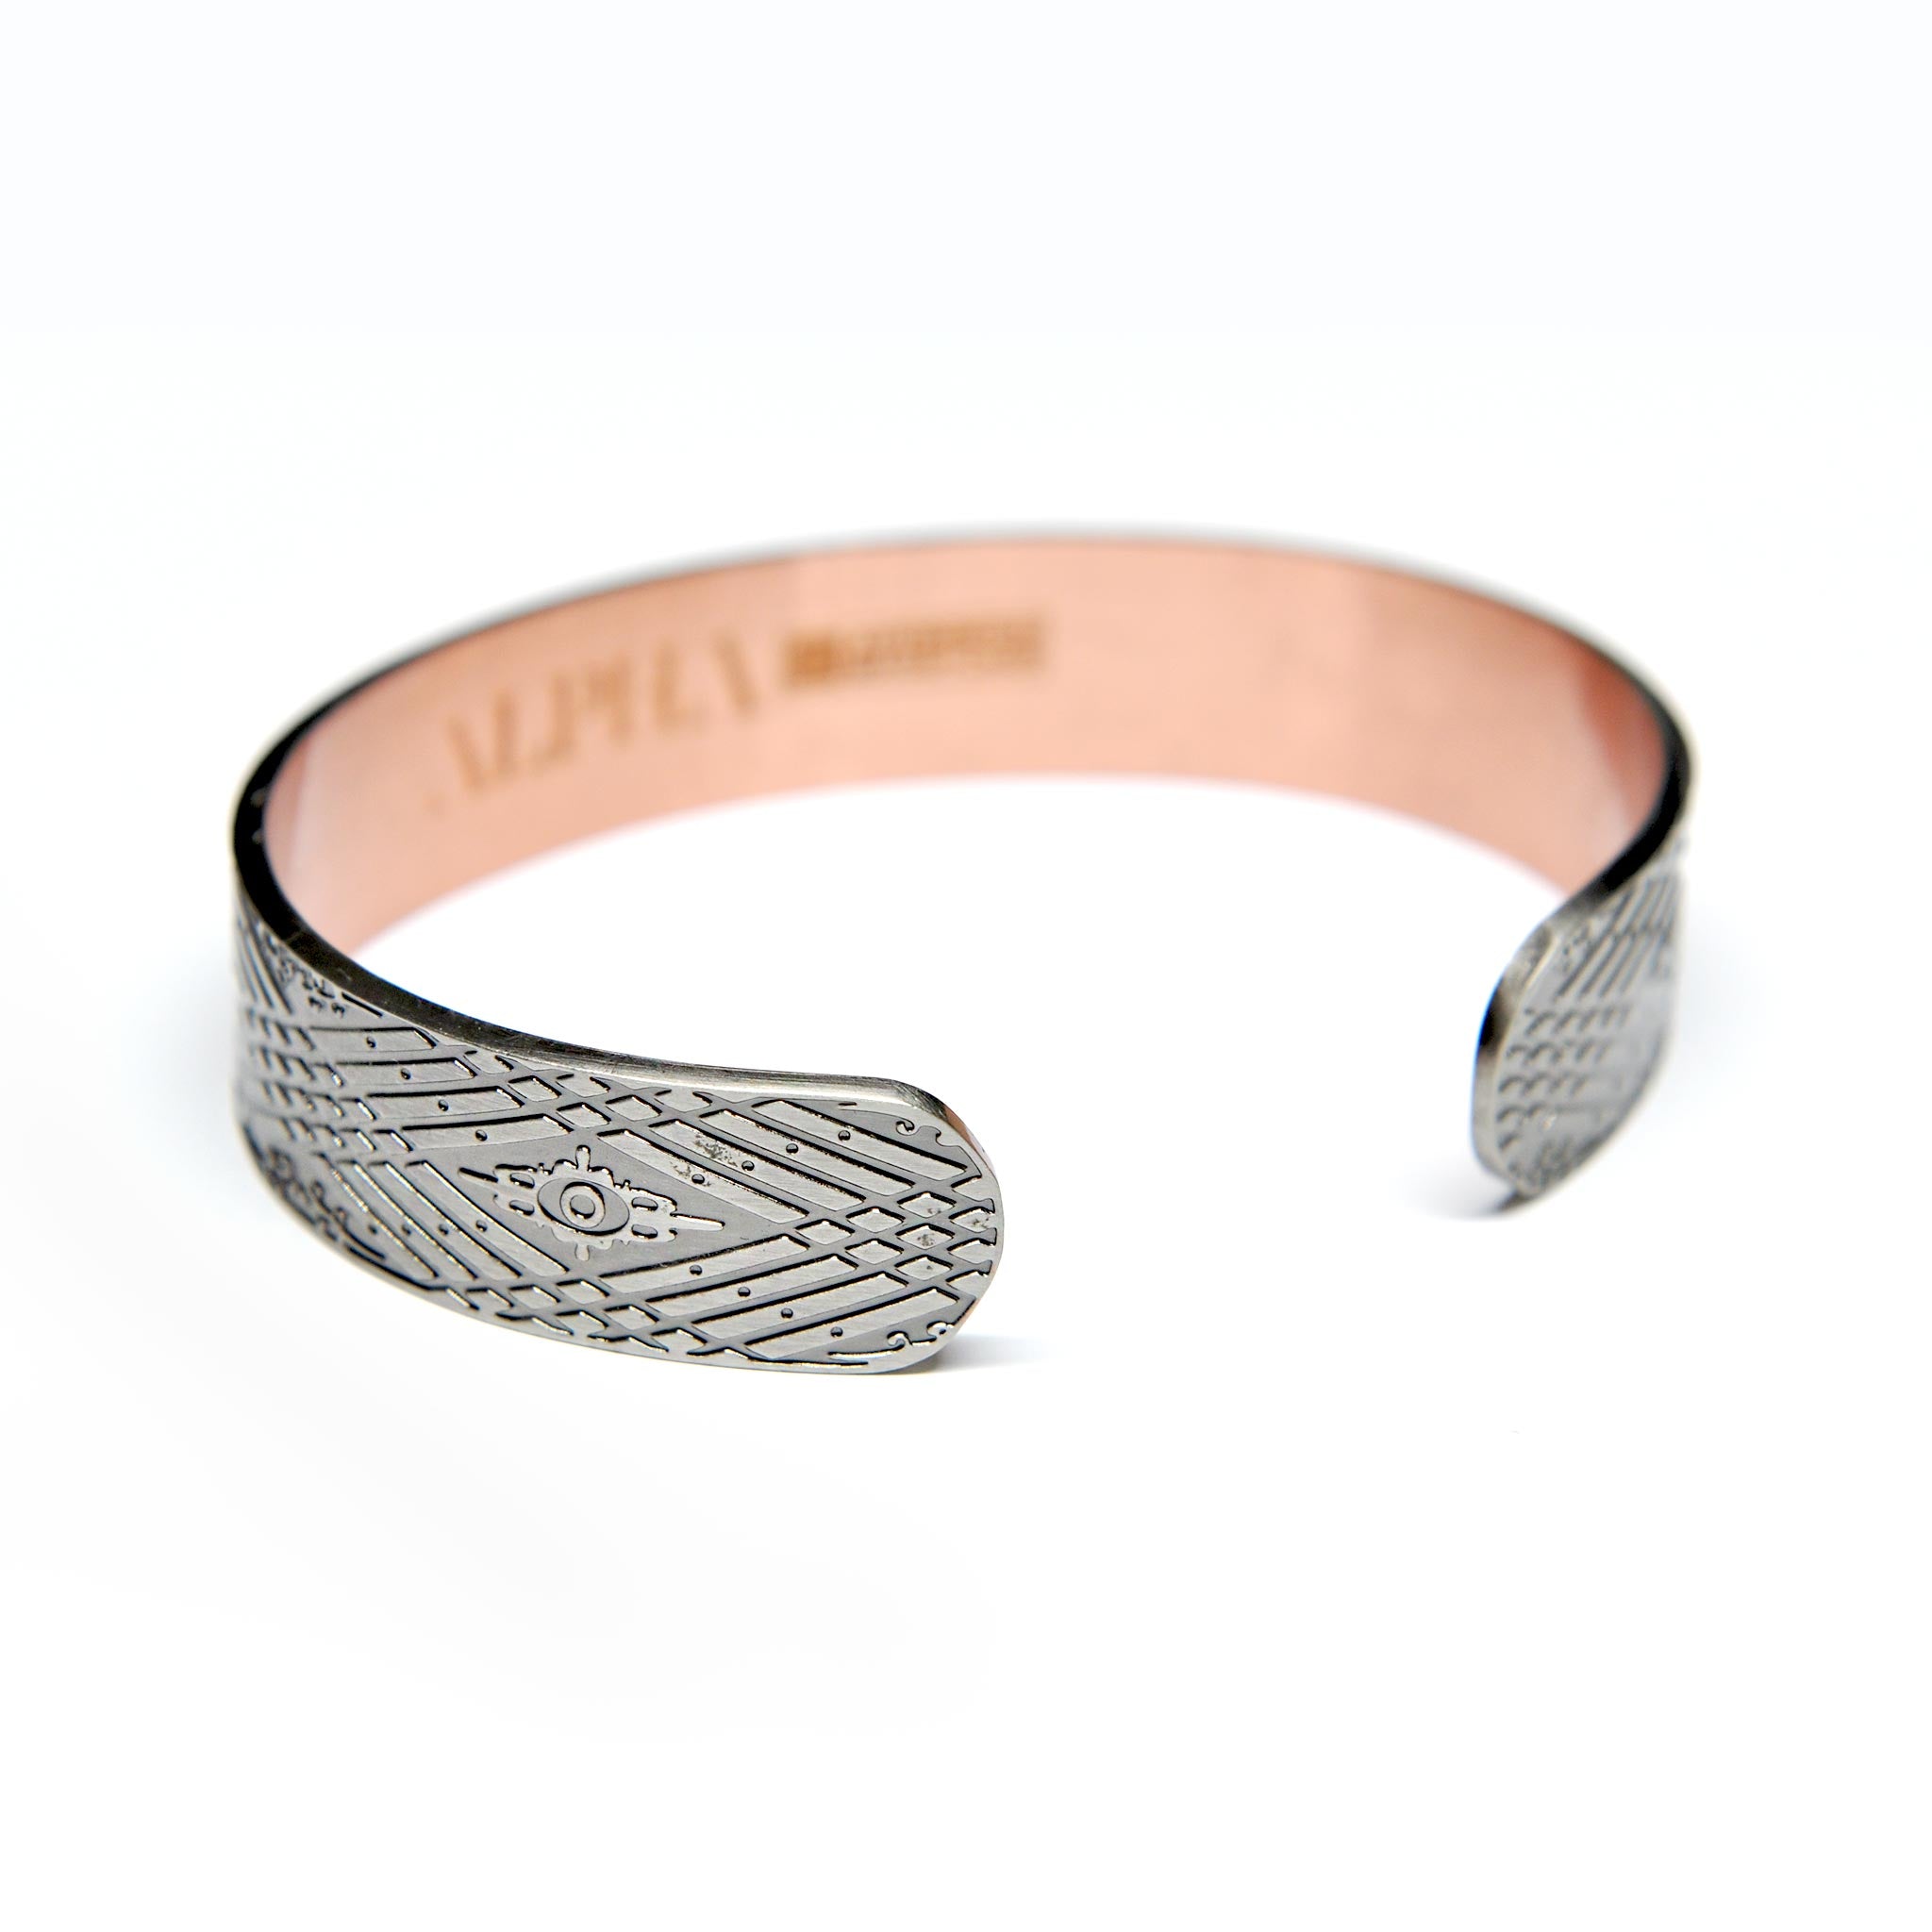 copper bracelet with magnets